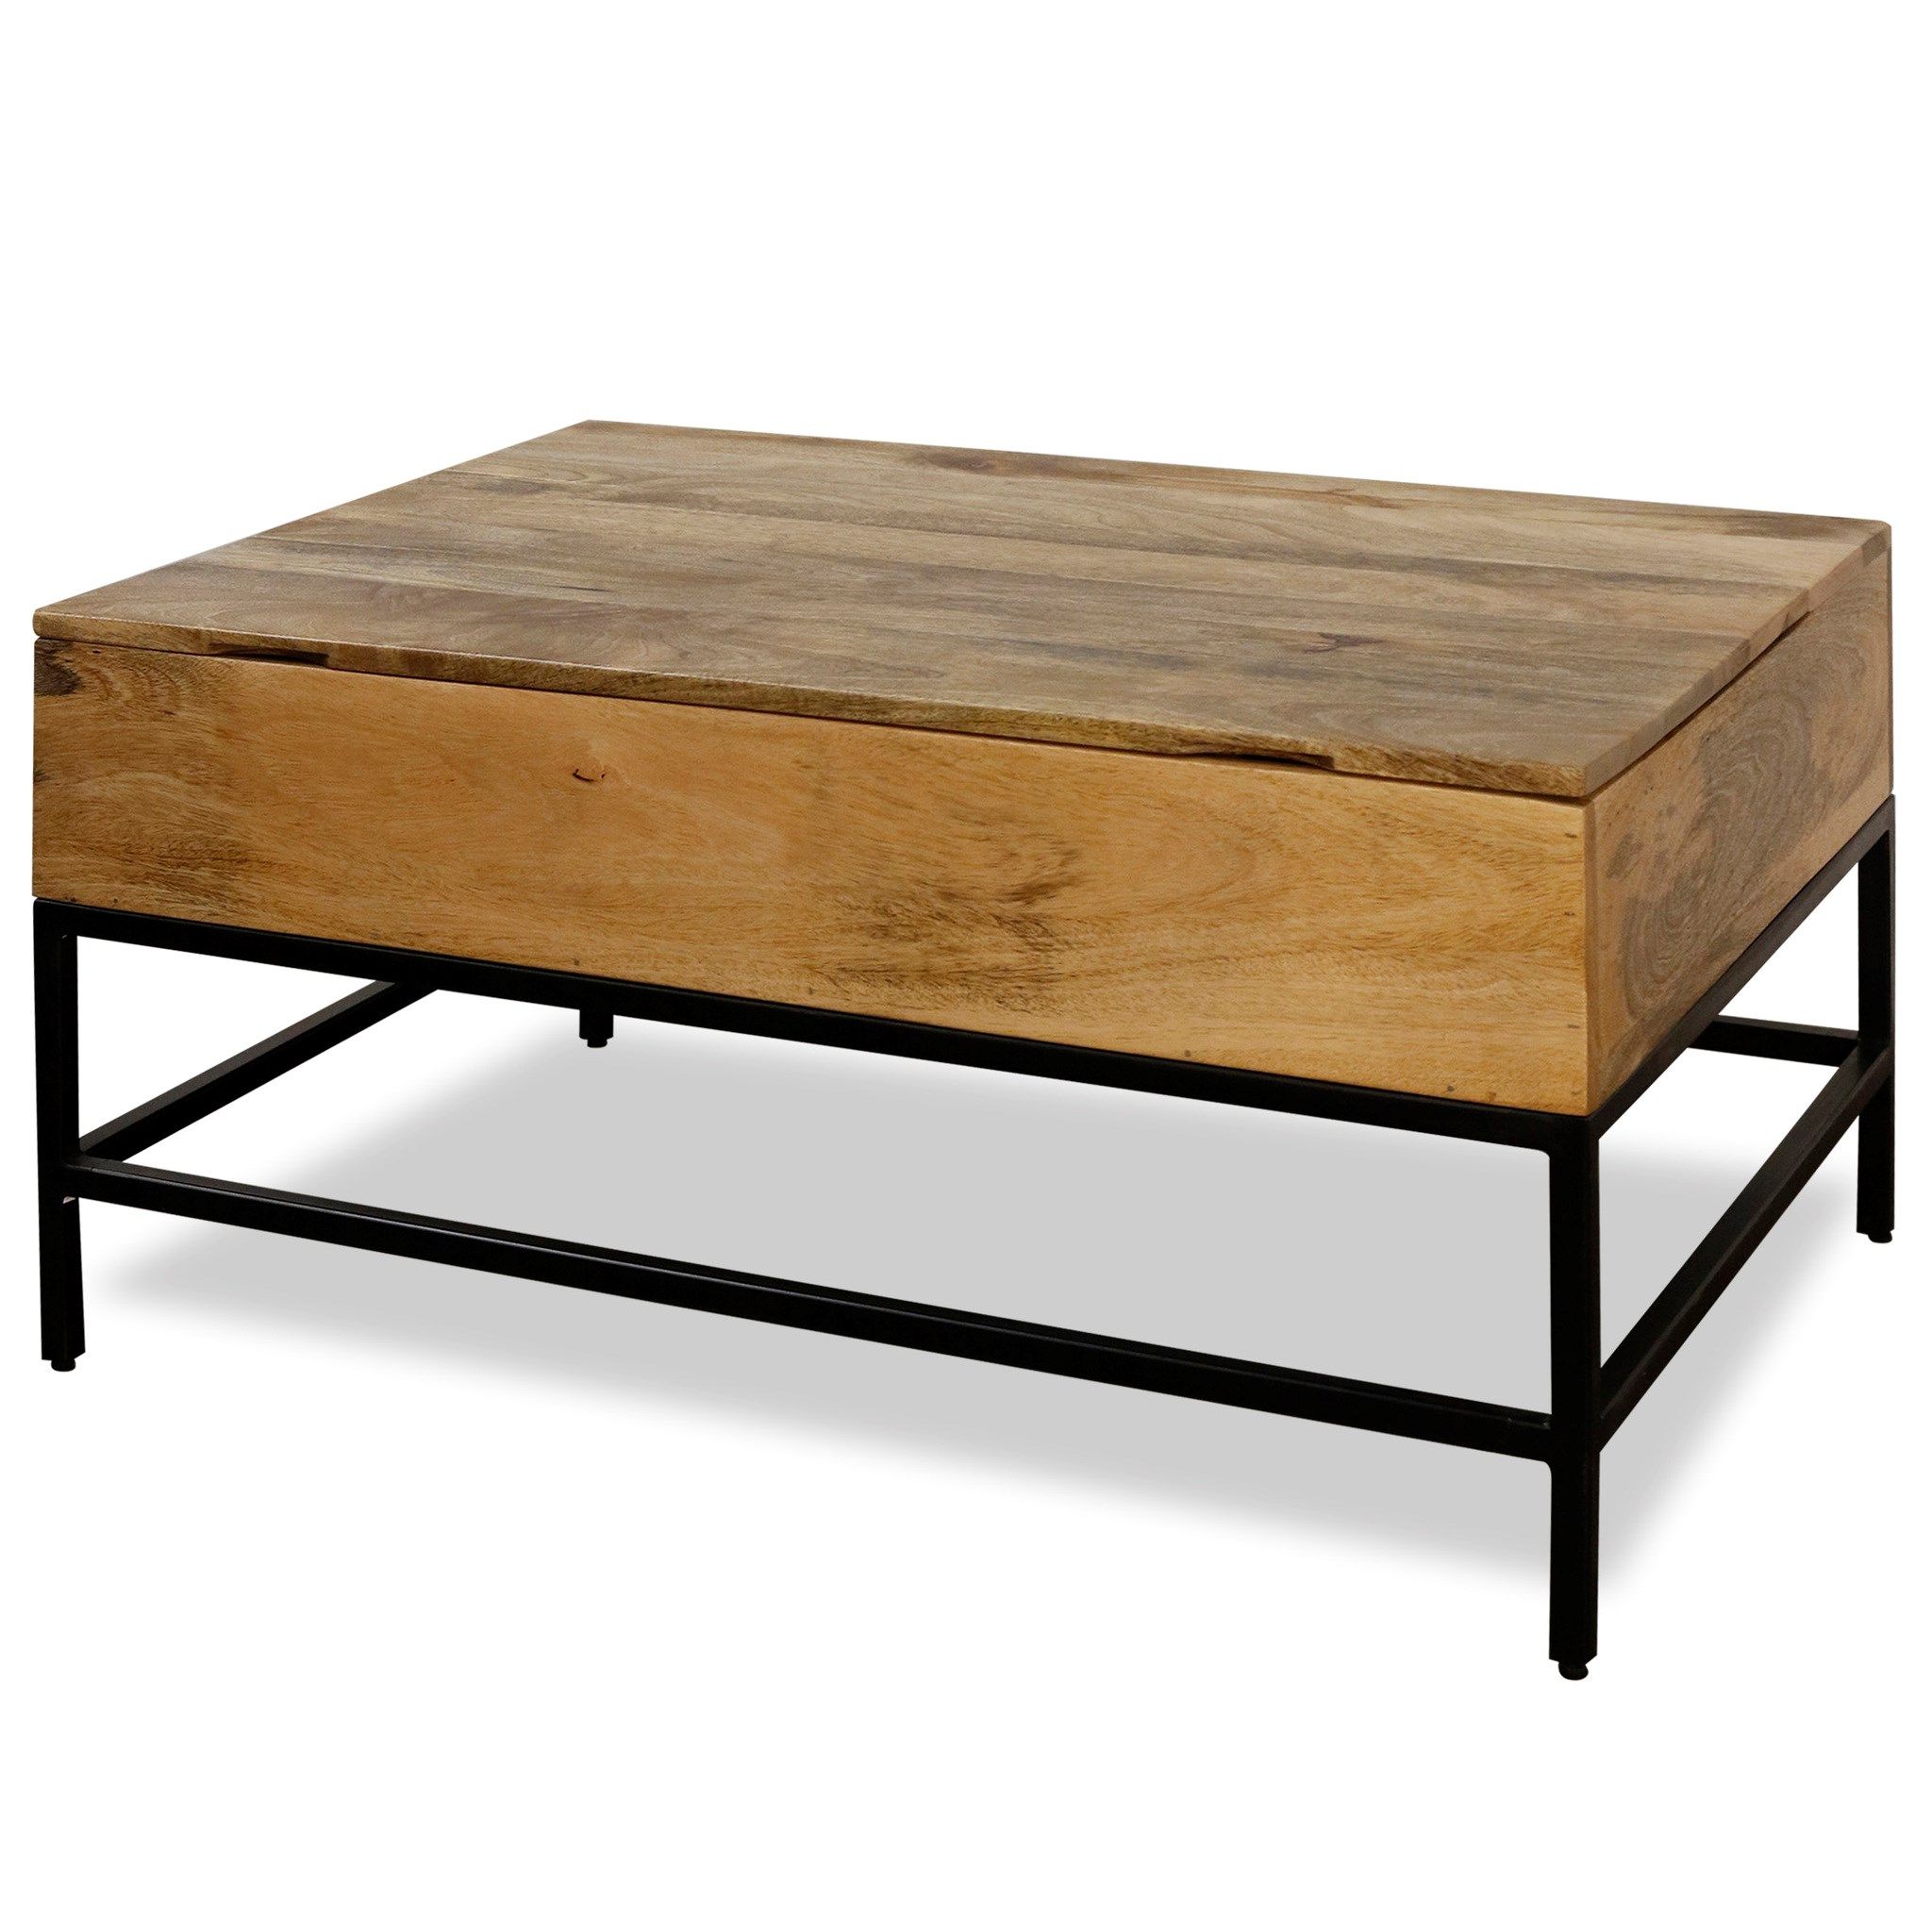 Solid Mango Wood Split Lift Top Storage Coffee Table In A Light Natural  Stainstylecraft – Broadway Furniture In Popular Natural Stained Wood Coffee Tables (View 5 of 20)